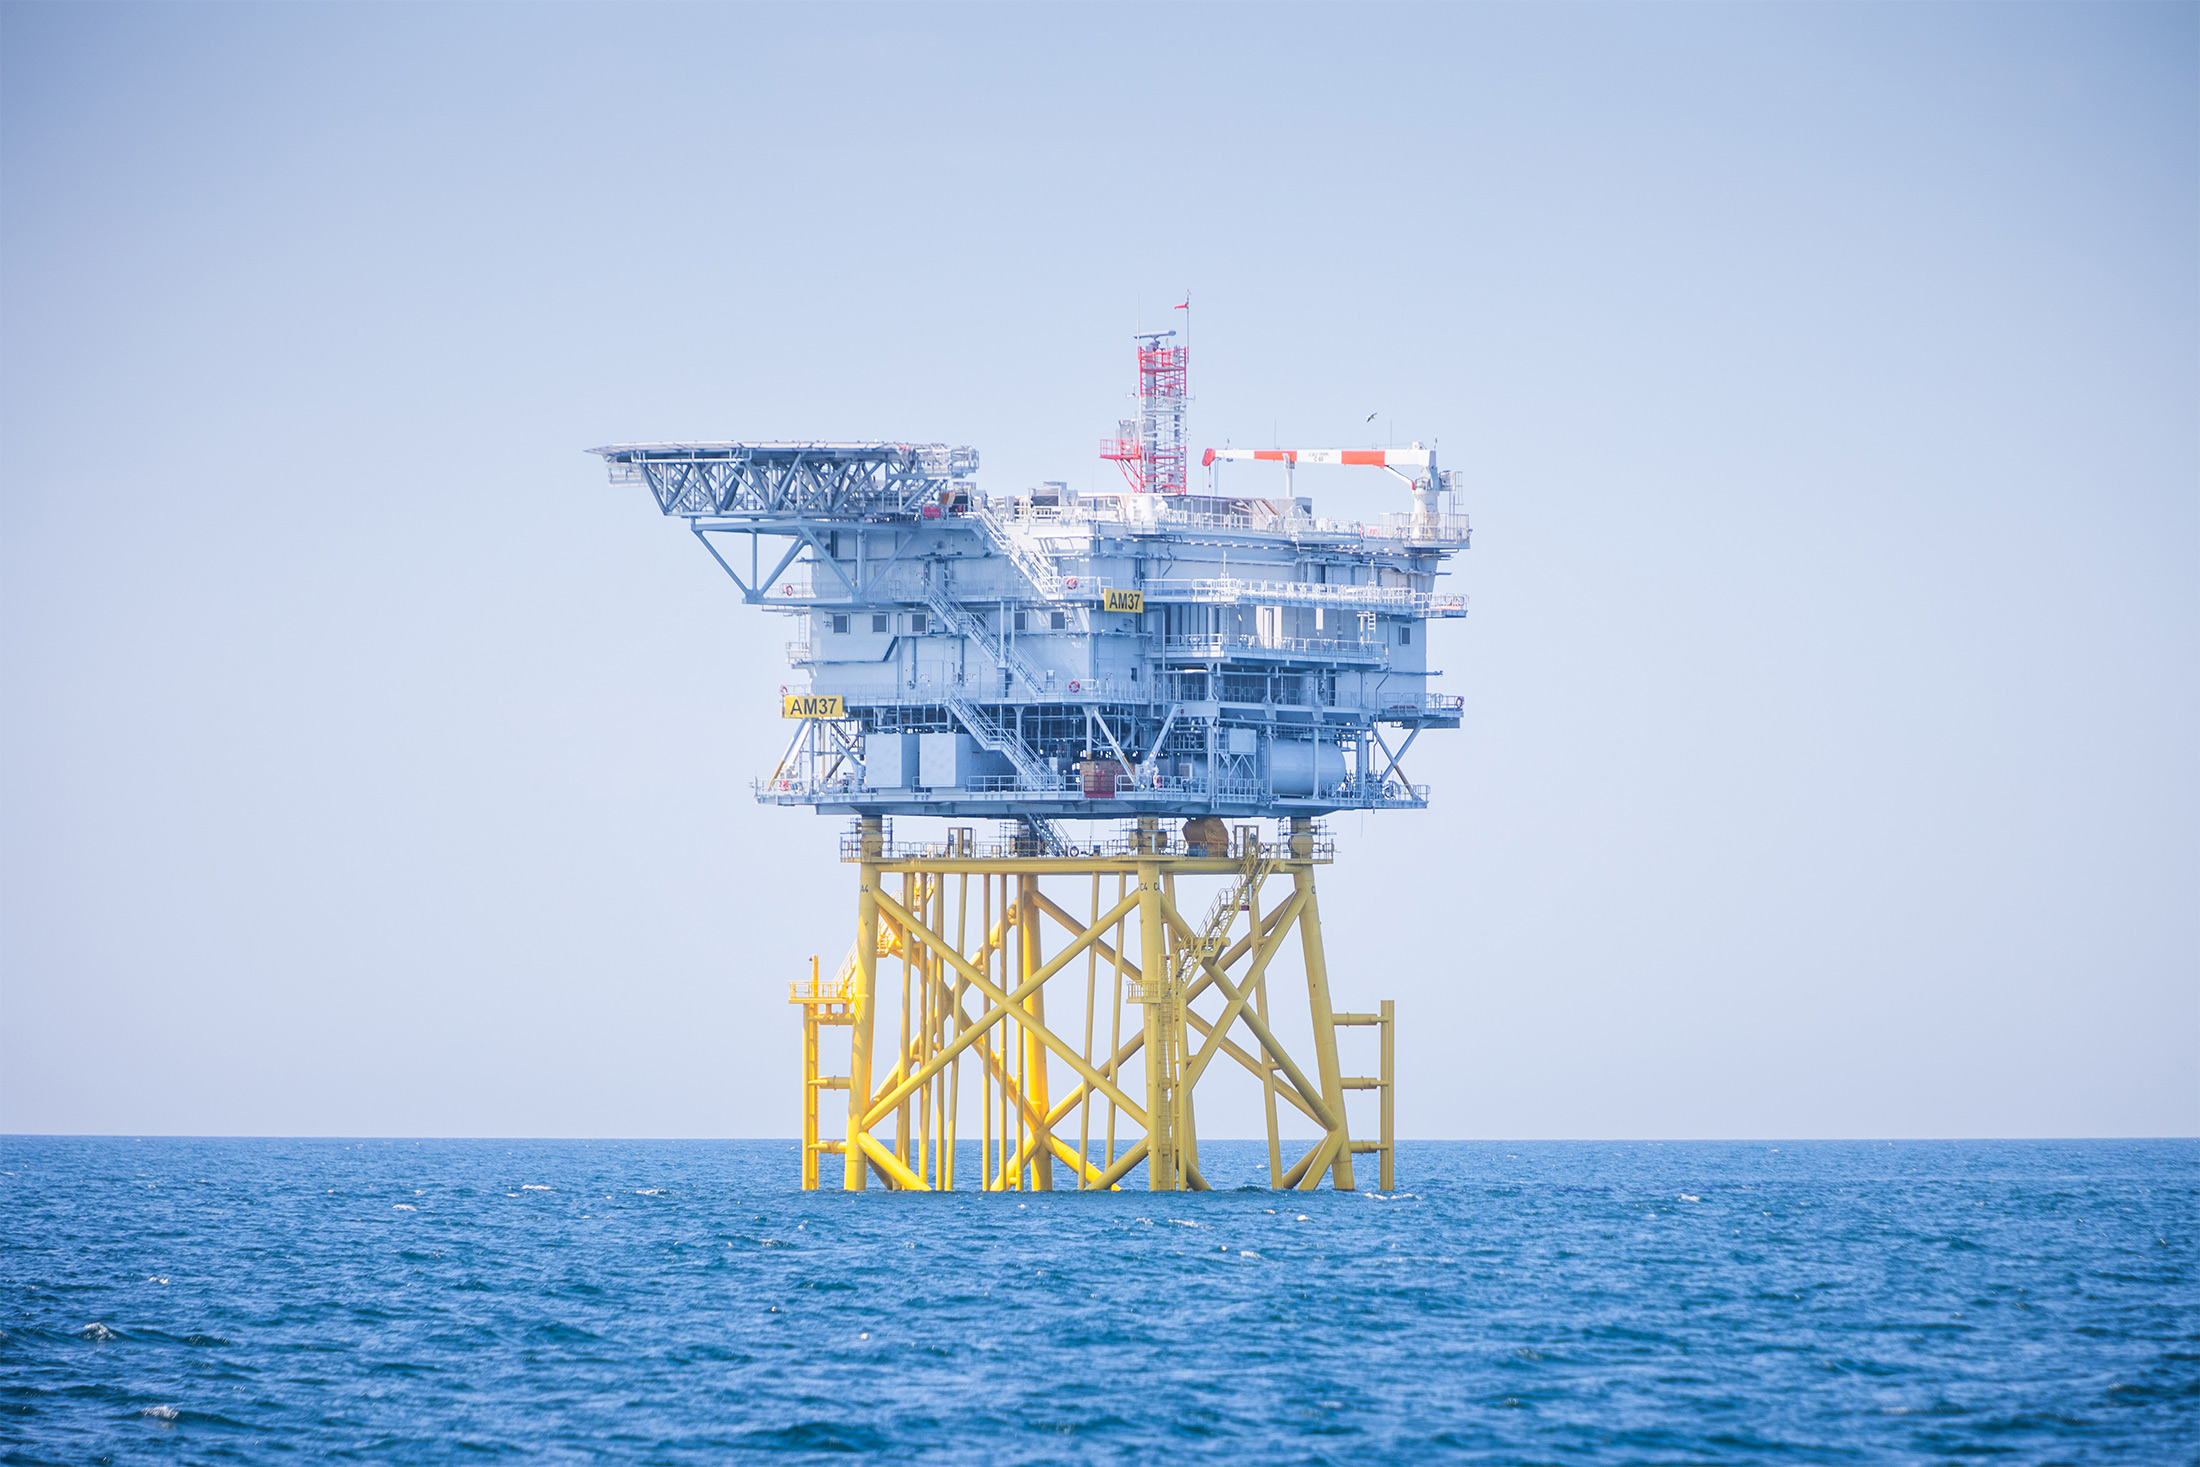 Offshore substation is expected to deliver electricity to shore in October.